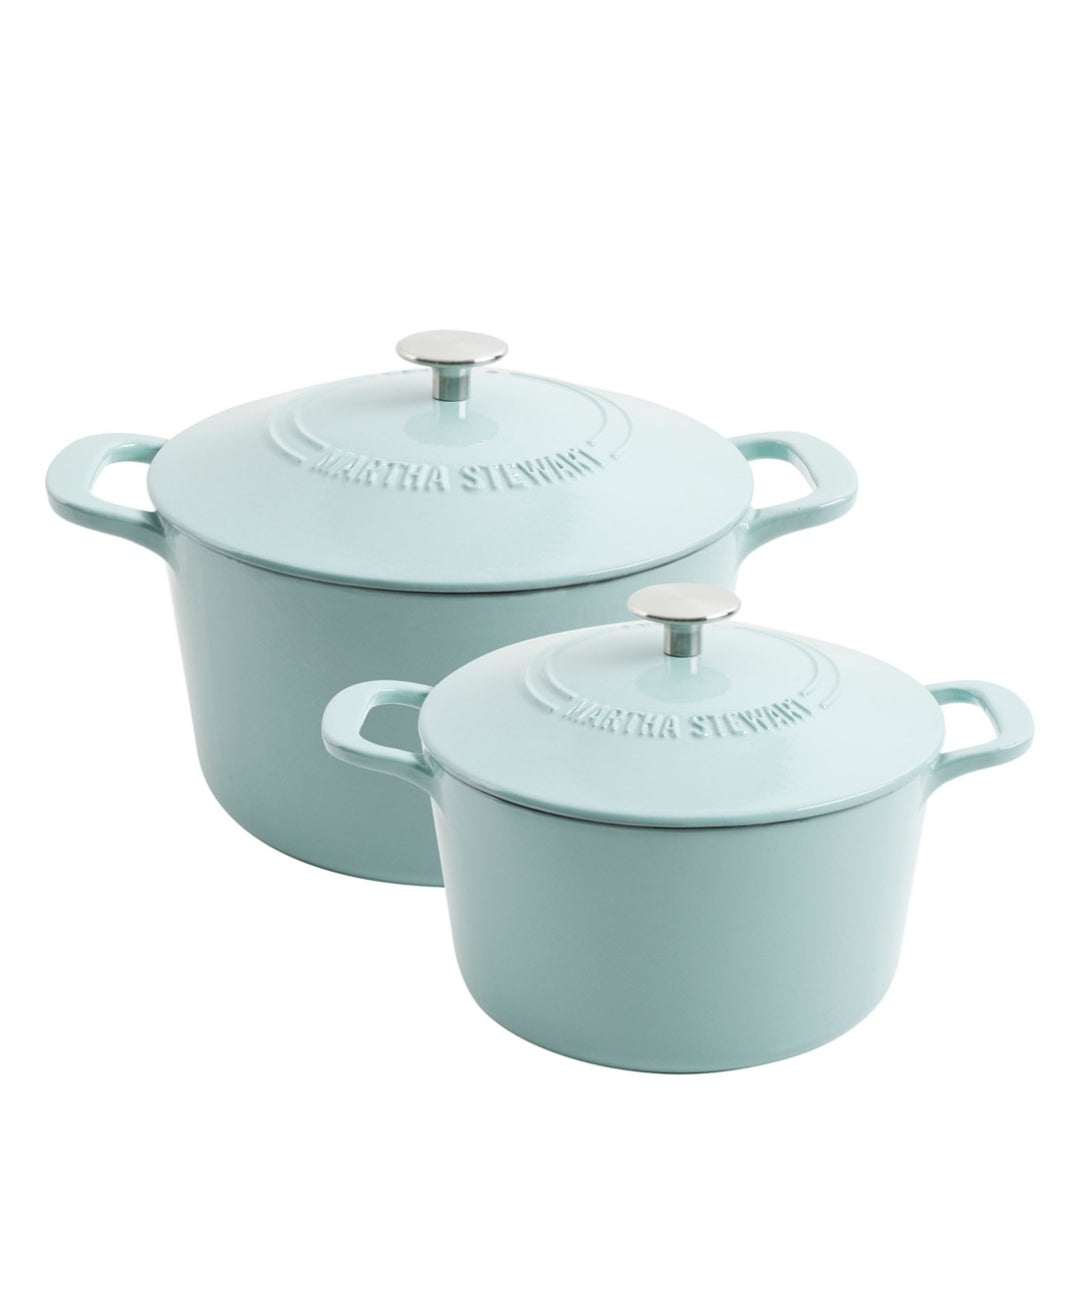 The 4-Quart and 7-Quart Enamel on Cast Iron Dutch Ovens, Cleans Easily,  Navy